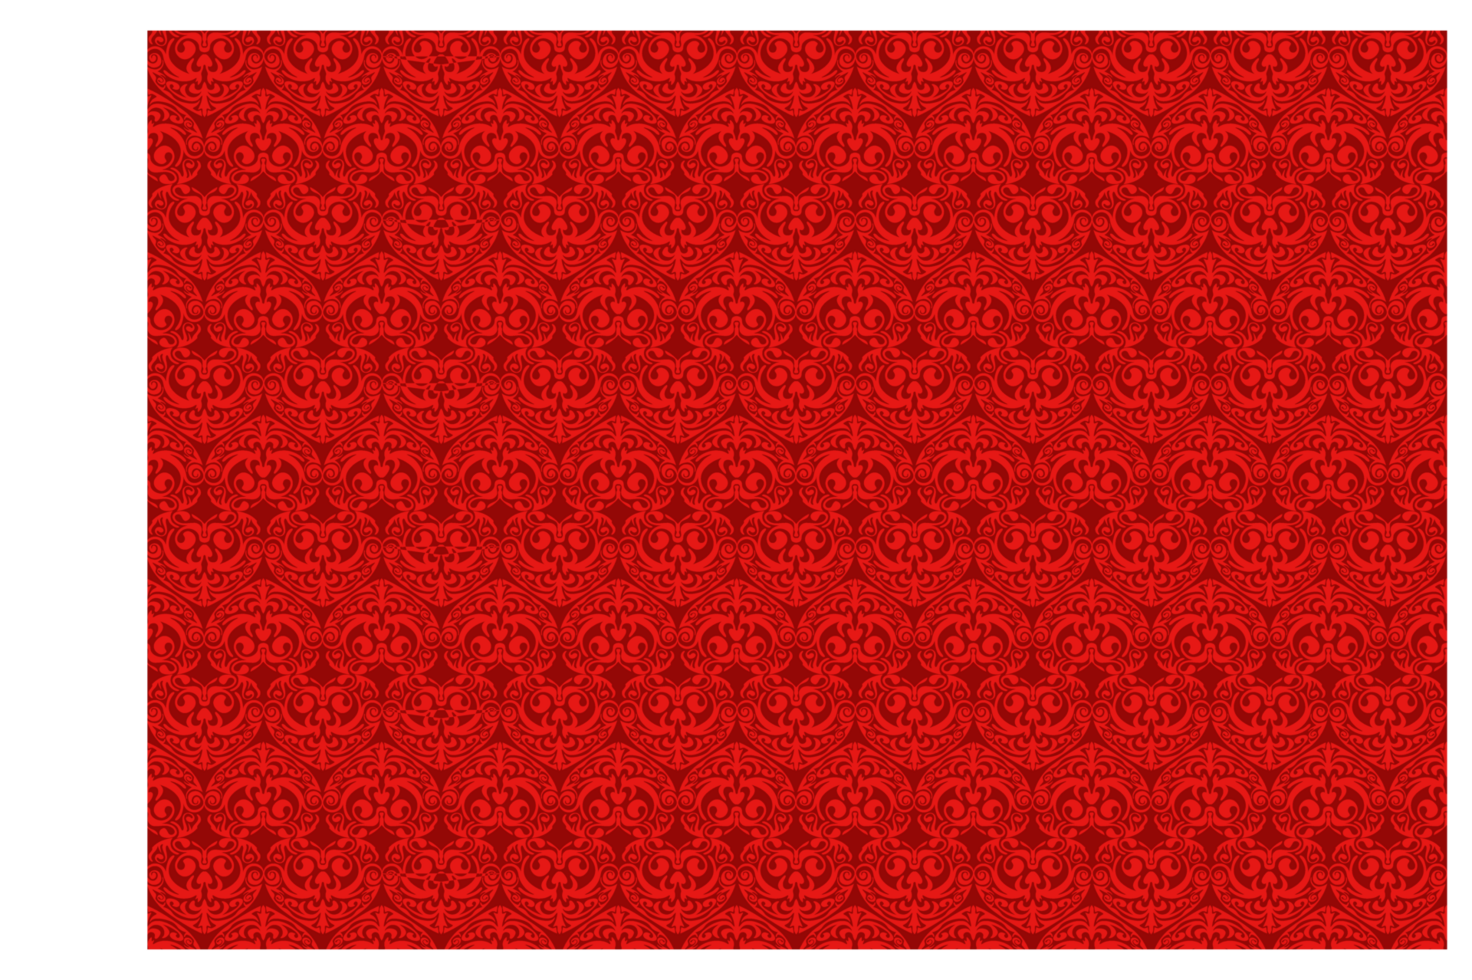 rot Ornament Muster Hintergrund png